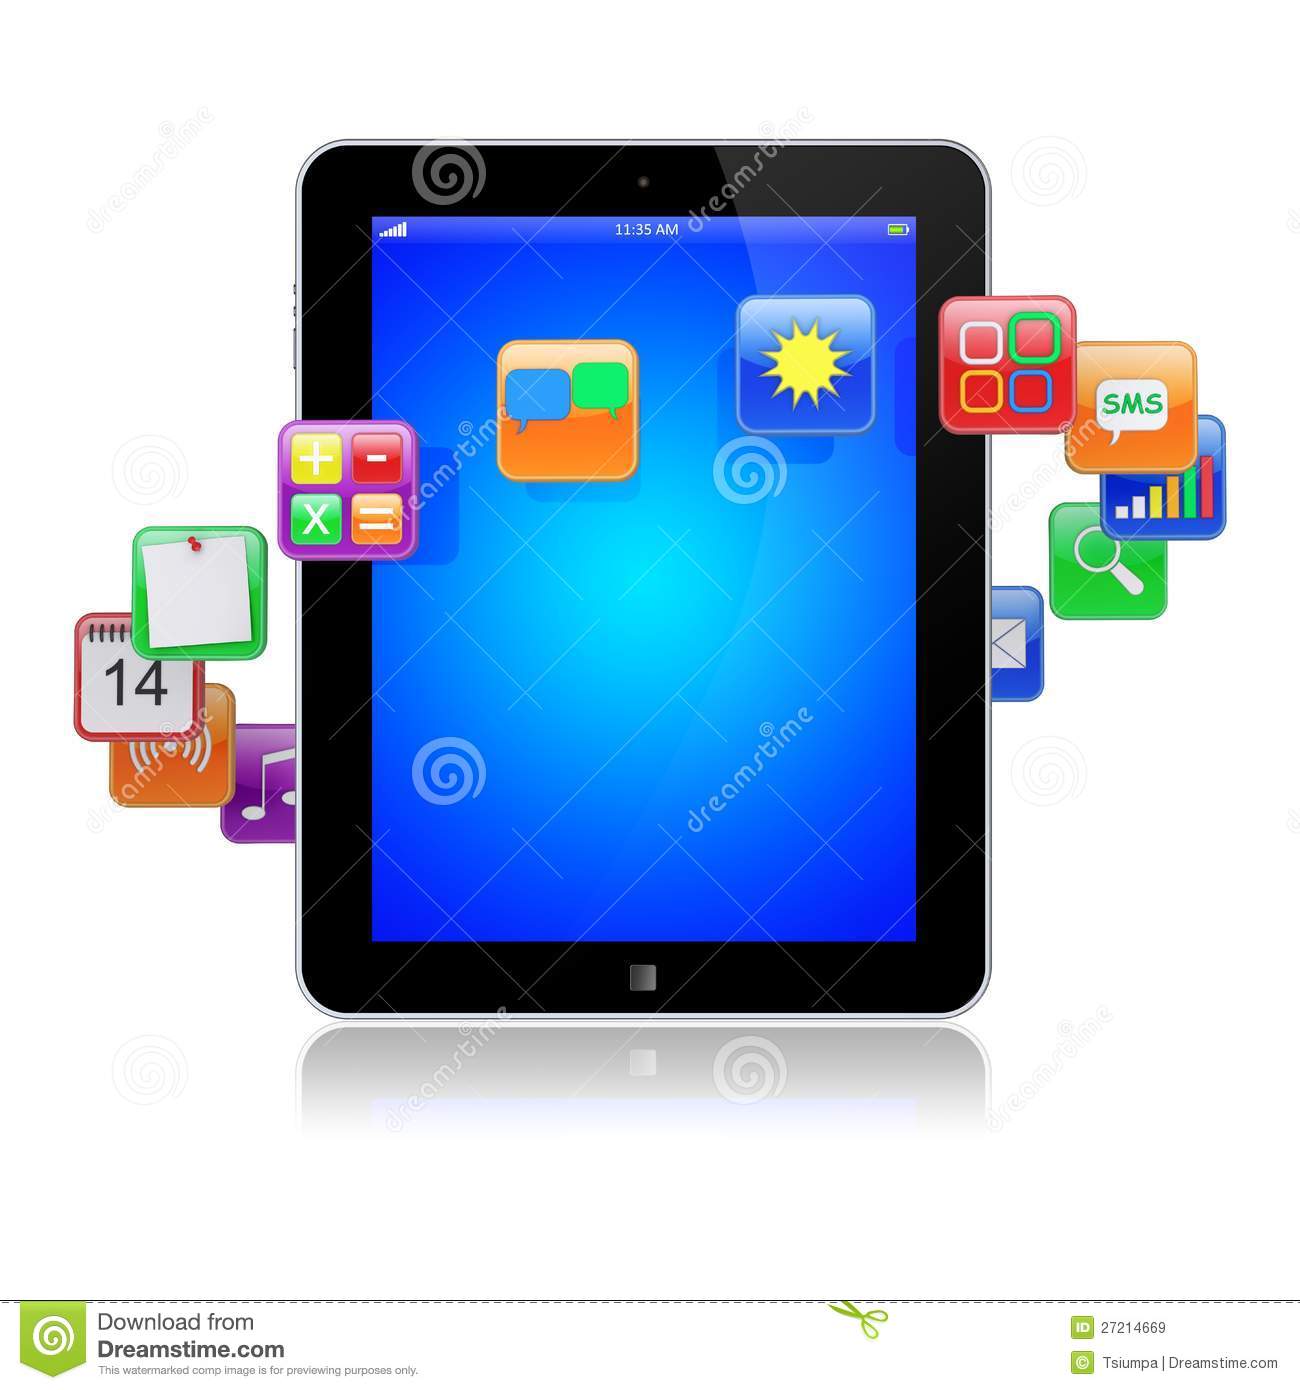 Download Free Apps for Tablet PC